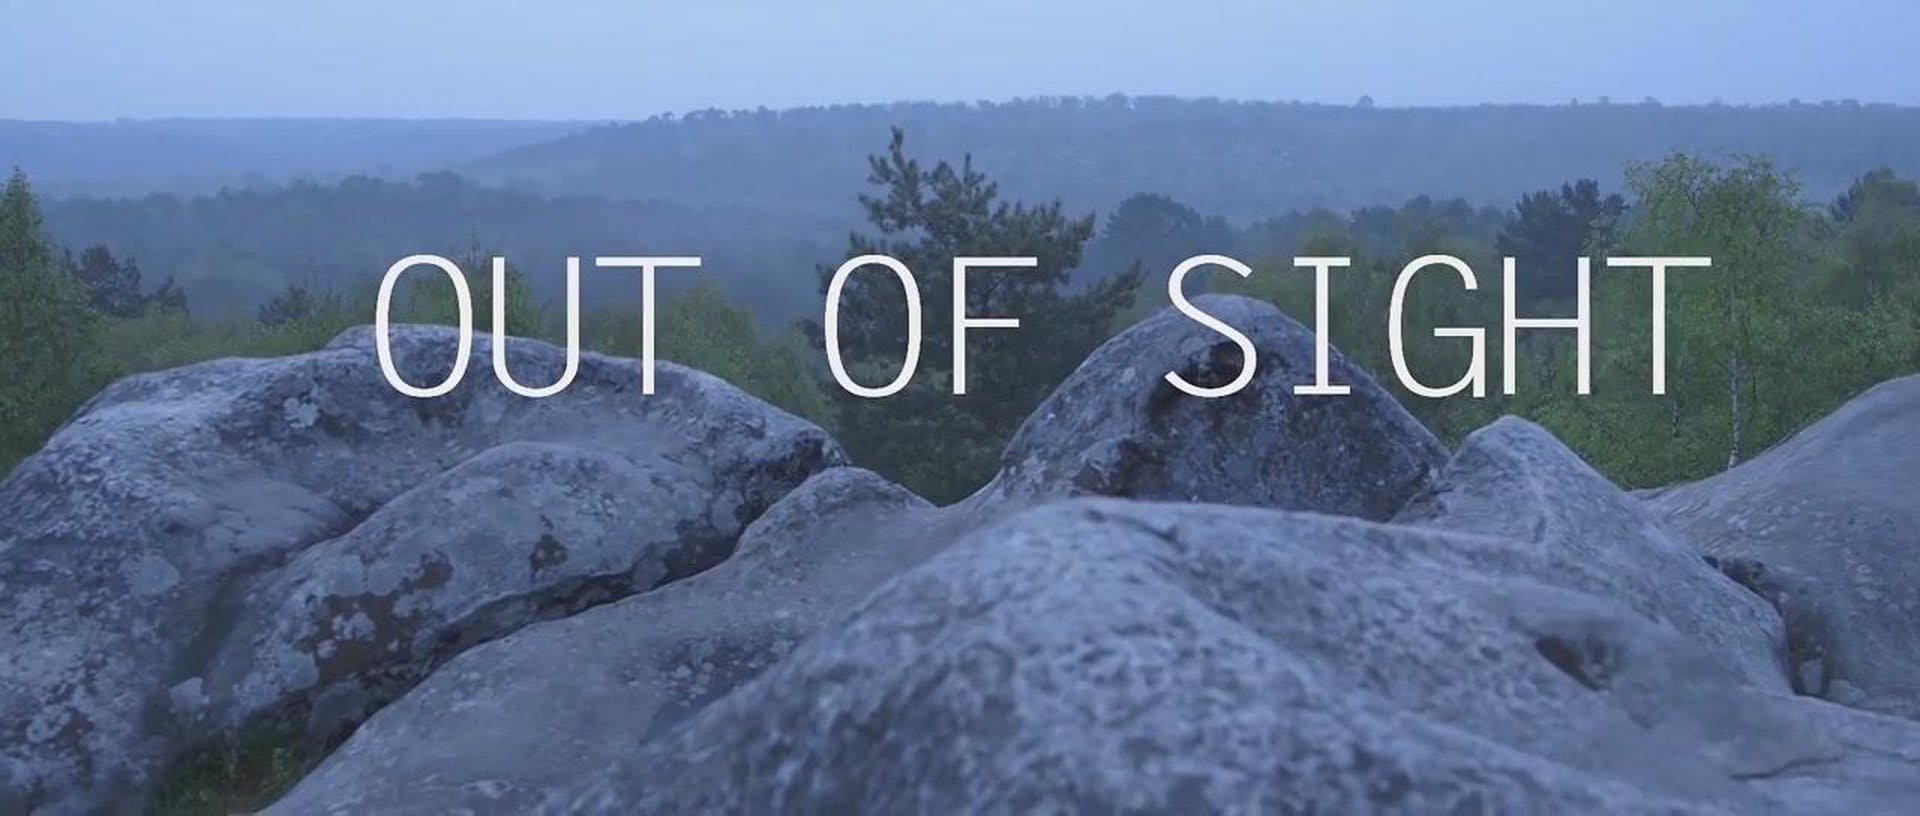 Out of Sight 2 | Trailer